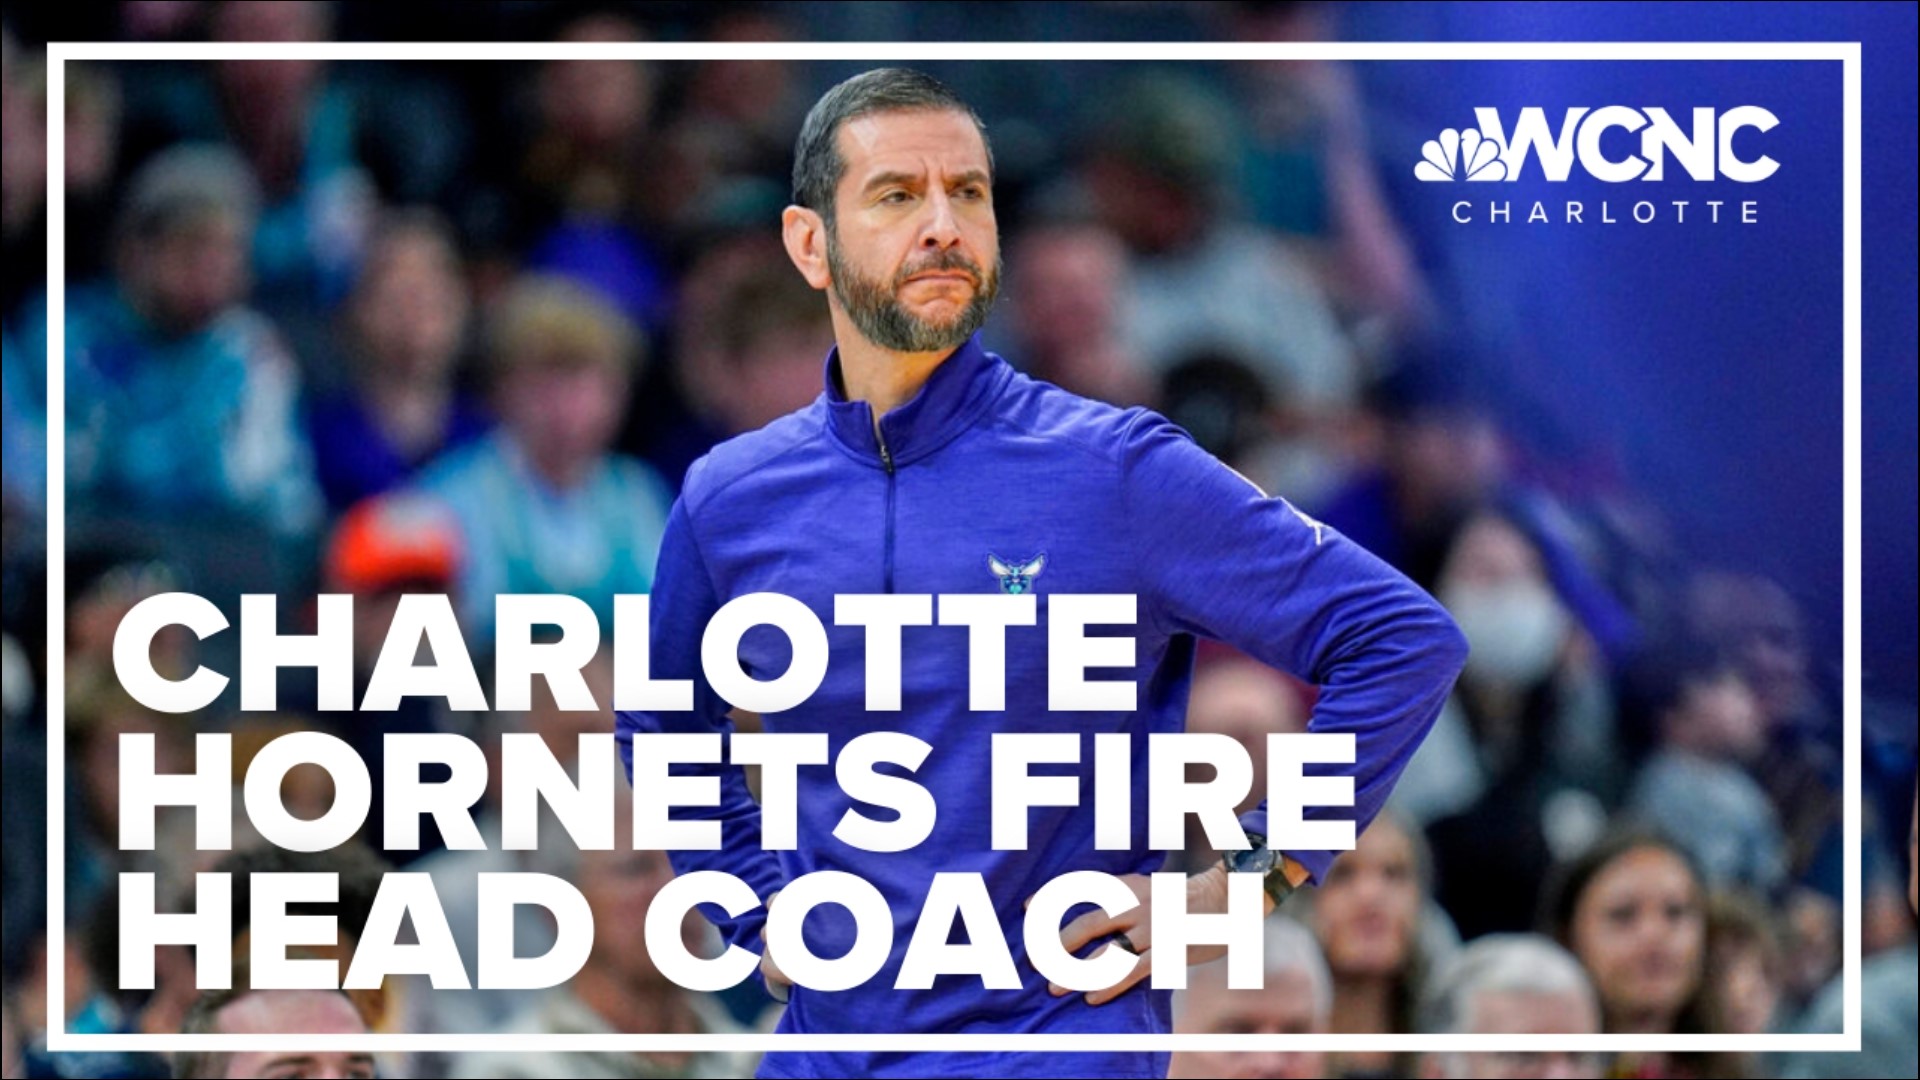 Borrego was in the hot seat after the Hornets lost in the play-in tournament.